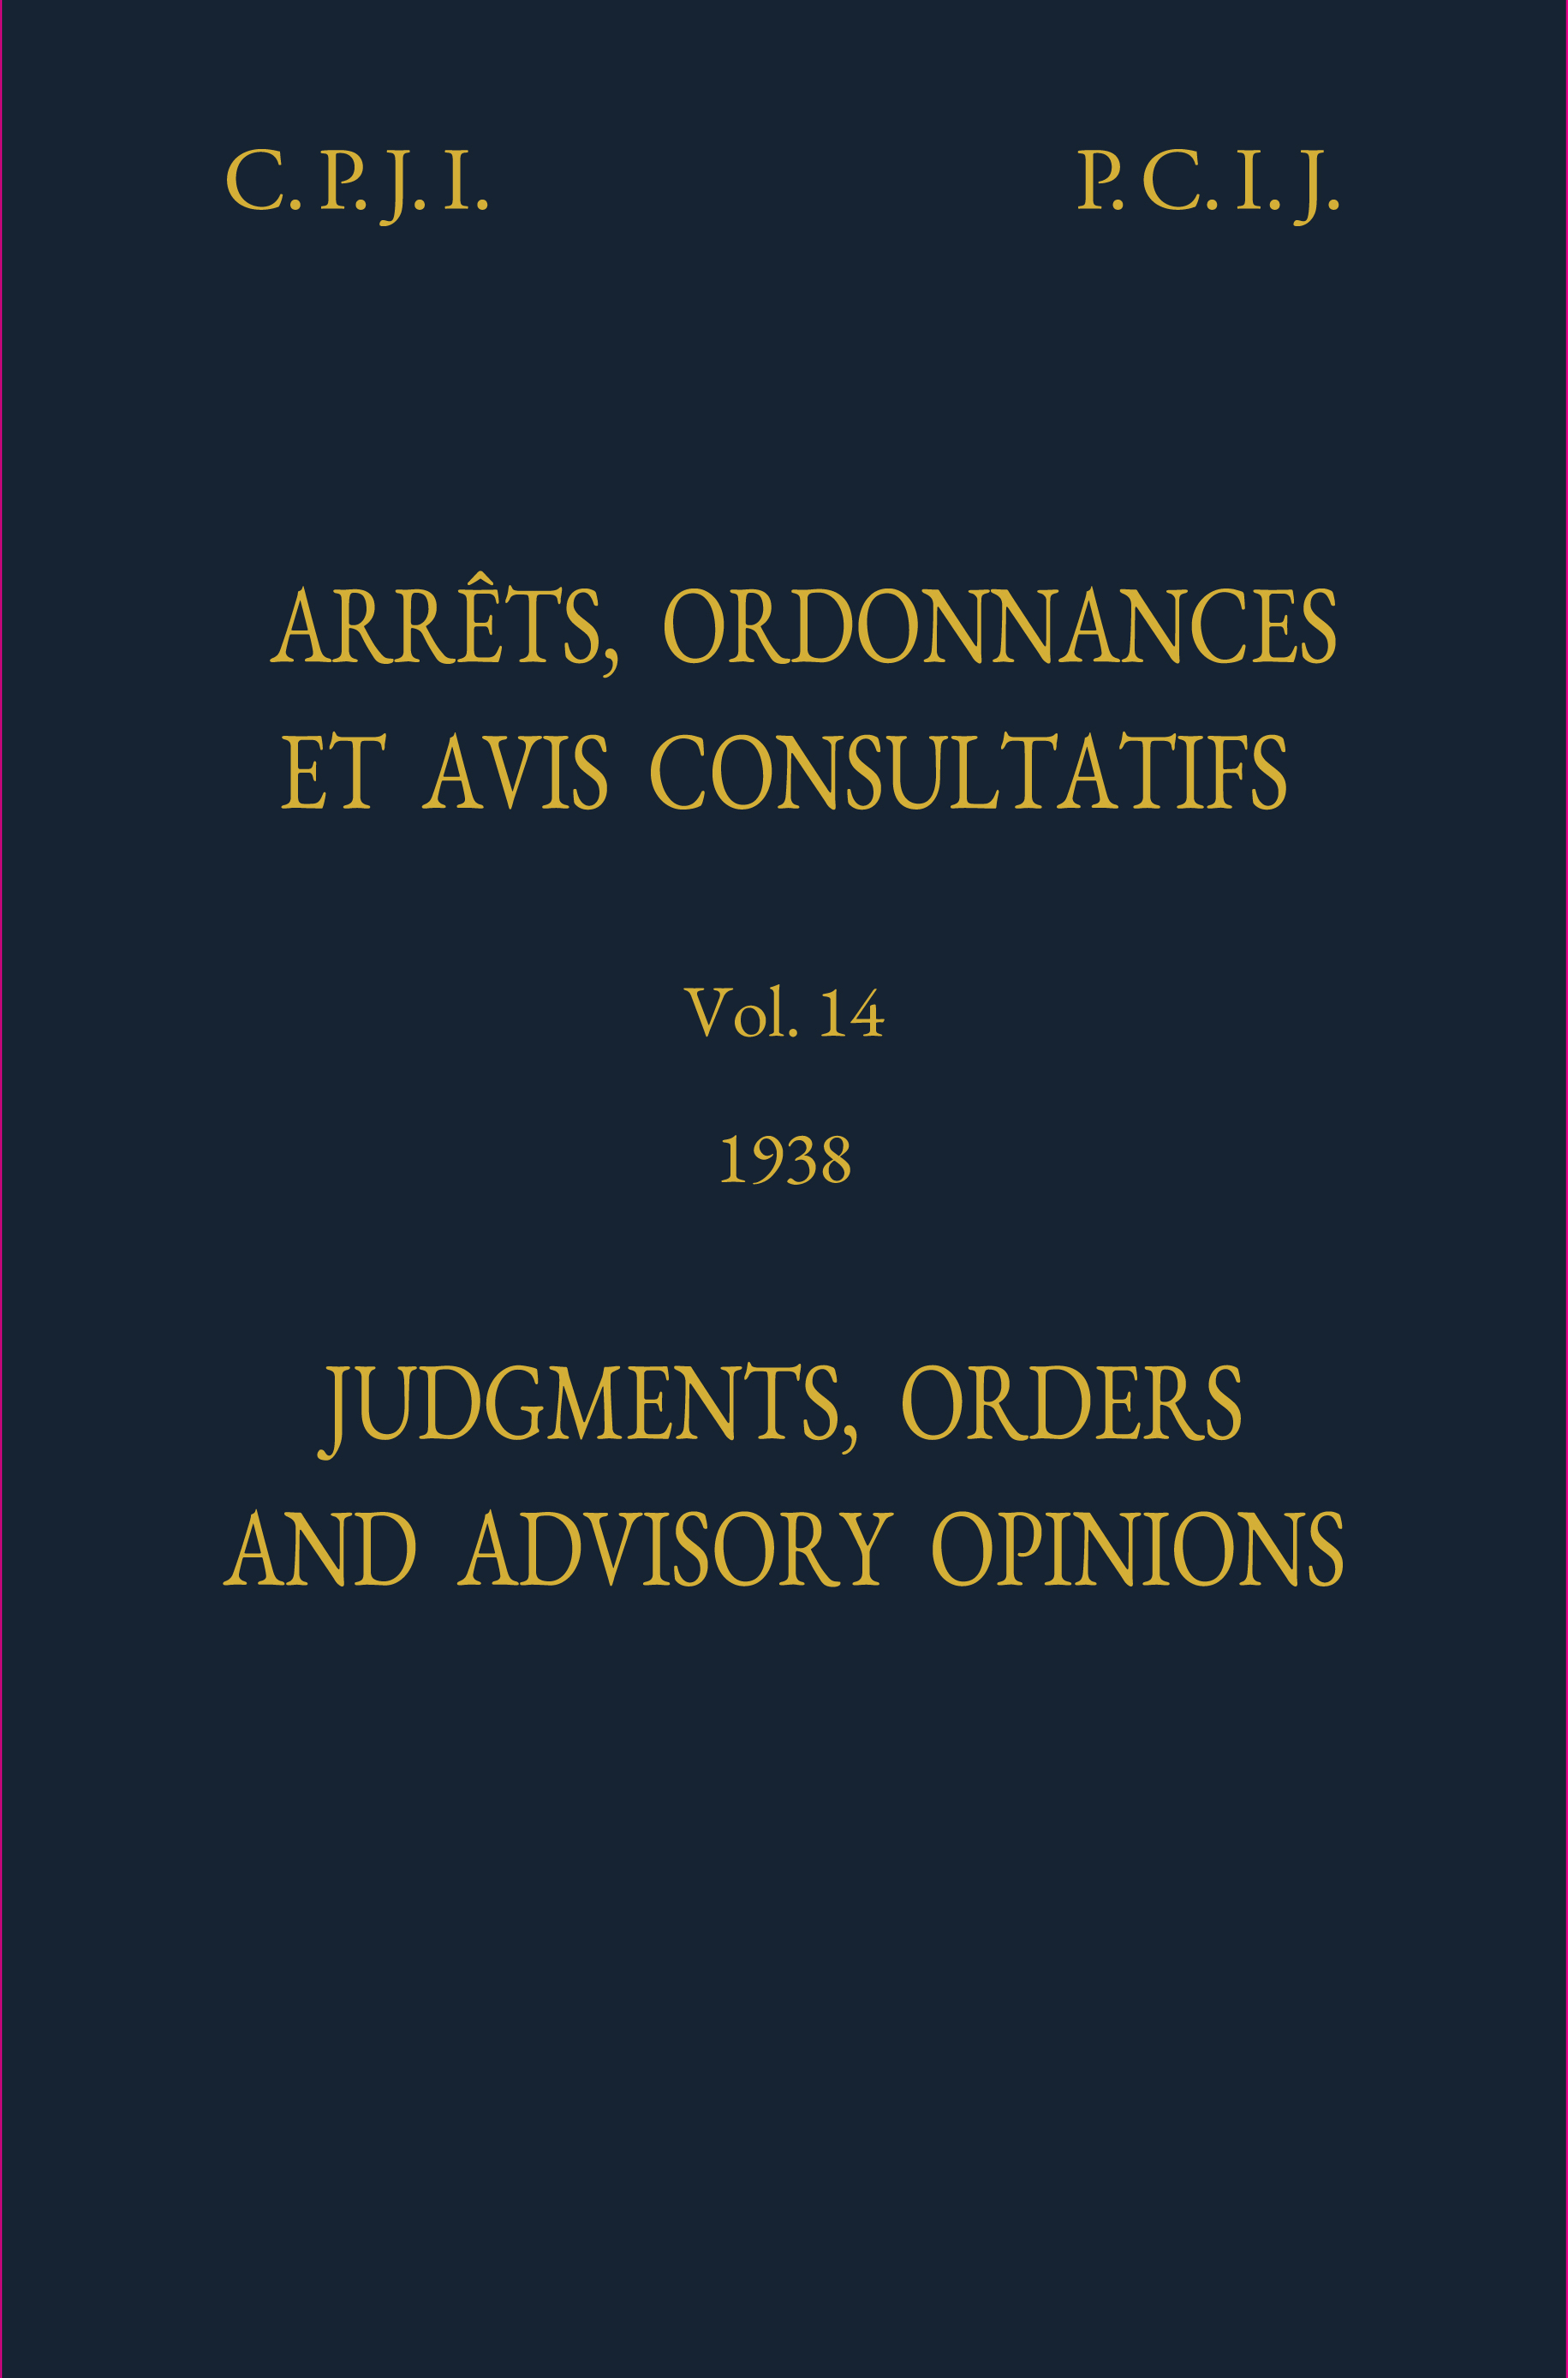 image of Judgments, Orders and Advisory Opinions: Vol. 14, 1938